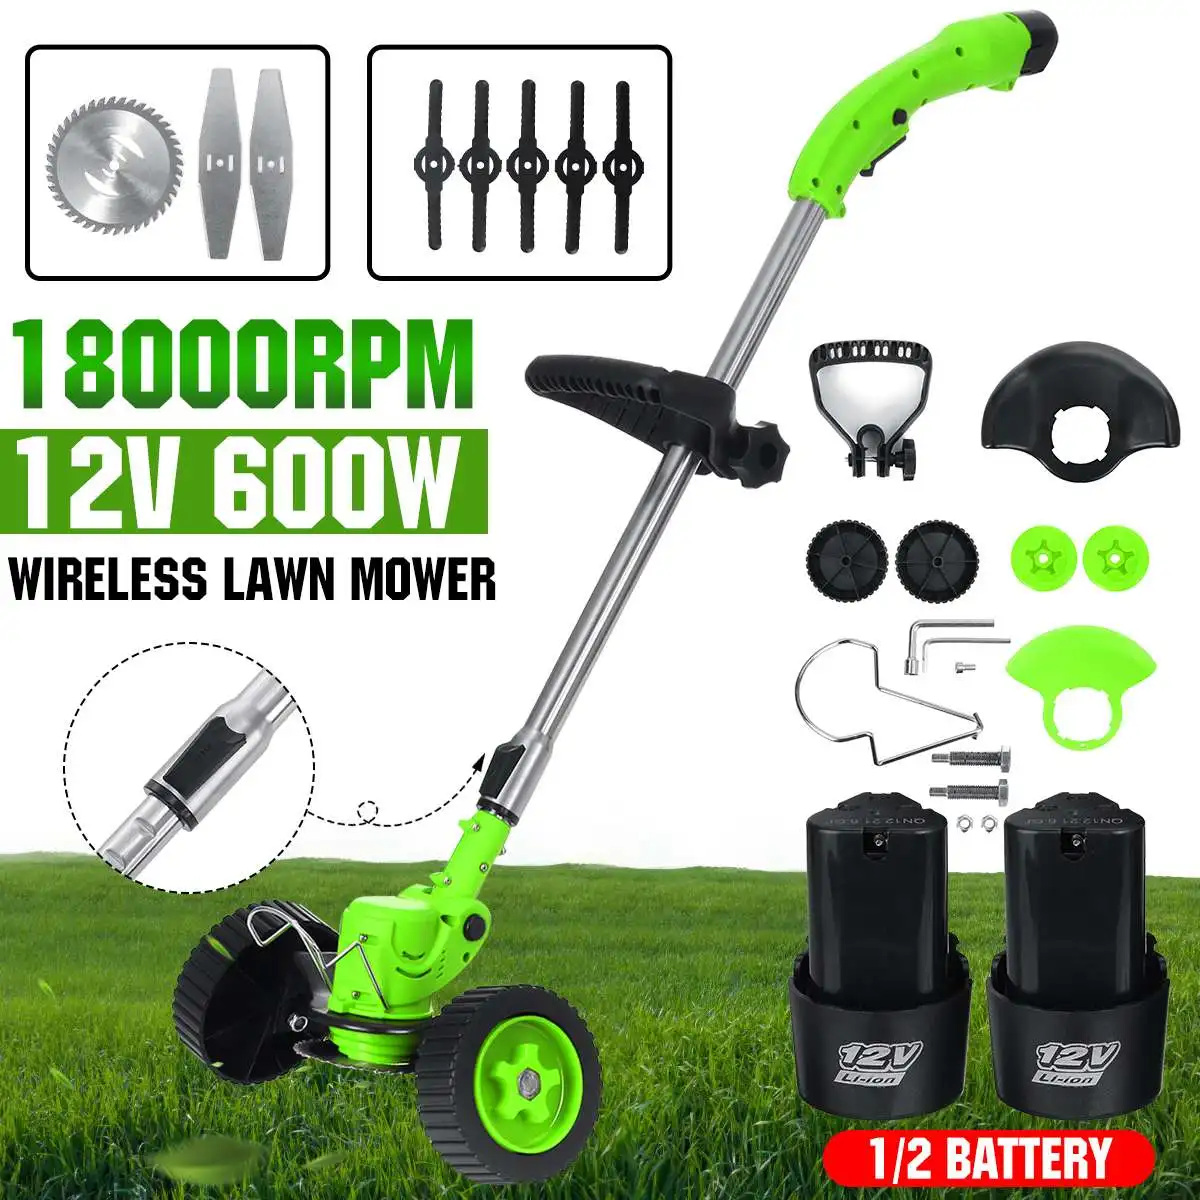 600W Powerful Electric Grass Trimmer Cutter Weeder Lawn Mower Cordless Cutting Machine Garden Tool With 2PC 18VF Li-ion Battery